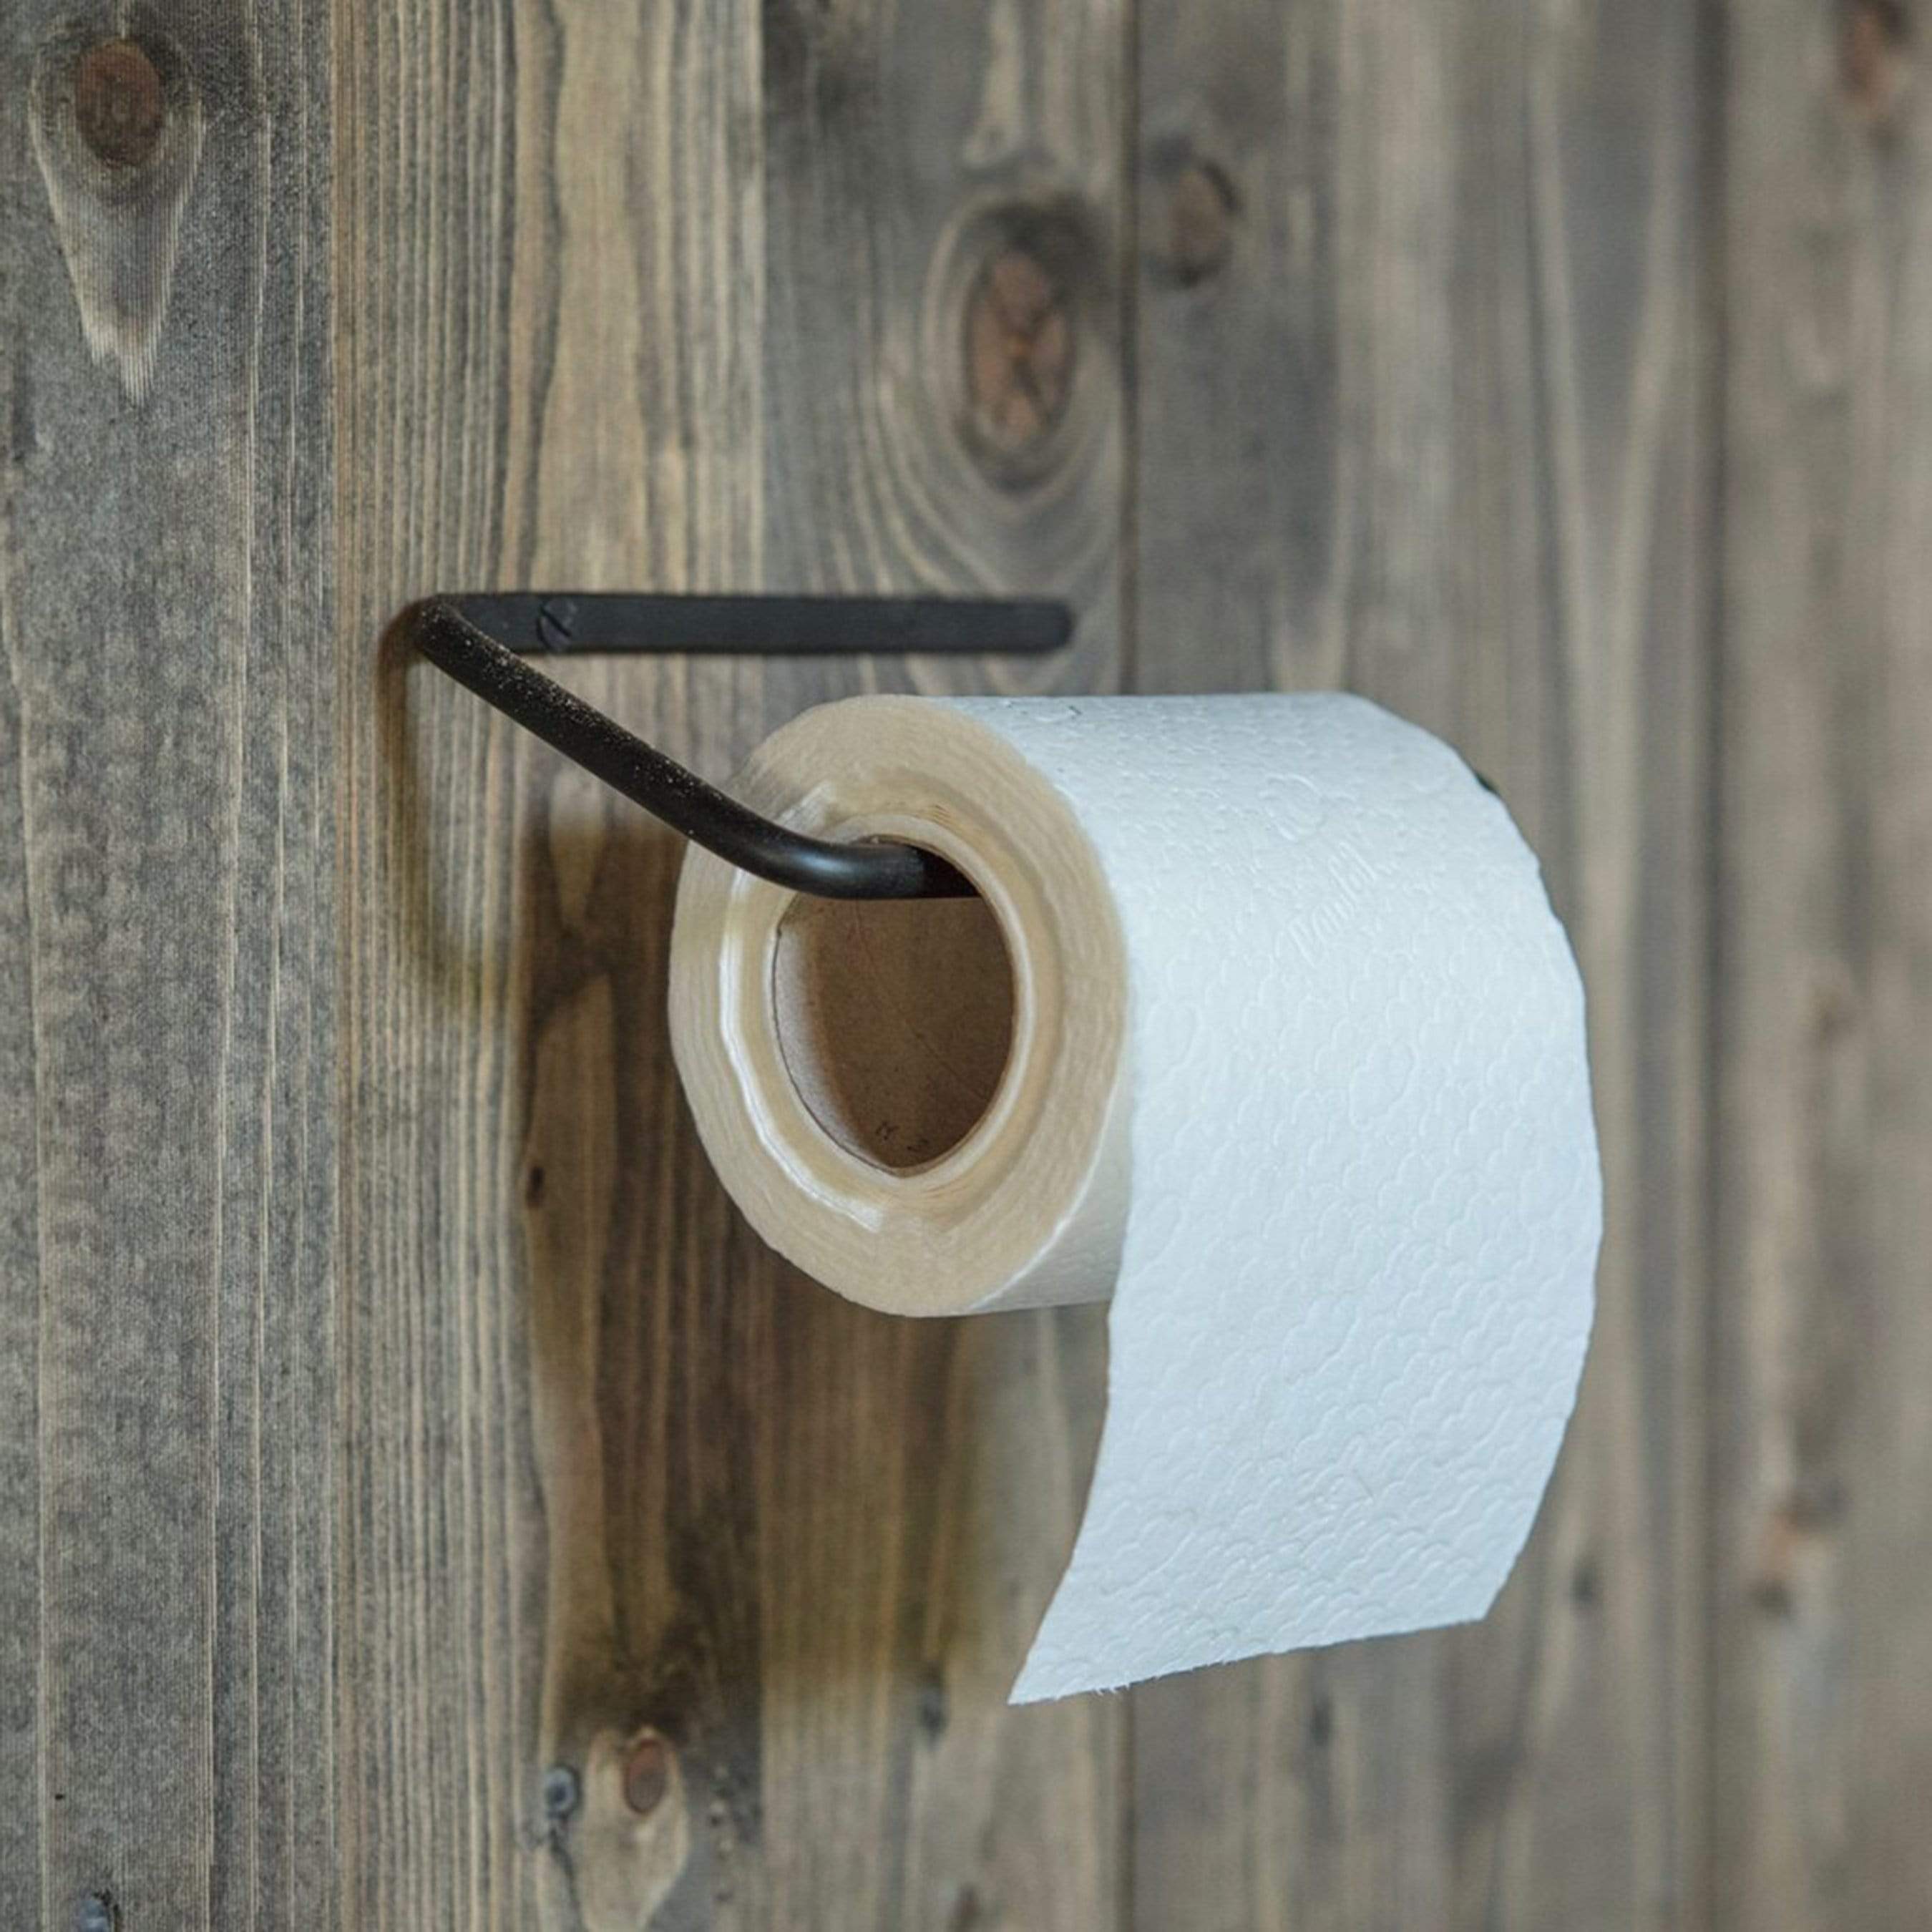 Bean Toilet Paper Holder Holds a Large Roll Hand Forged Iron Black